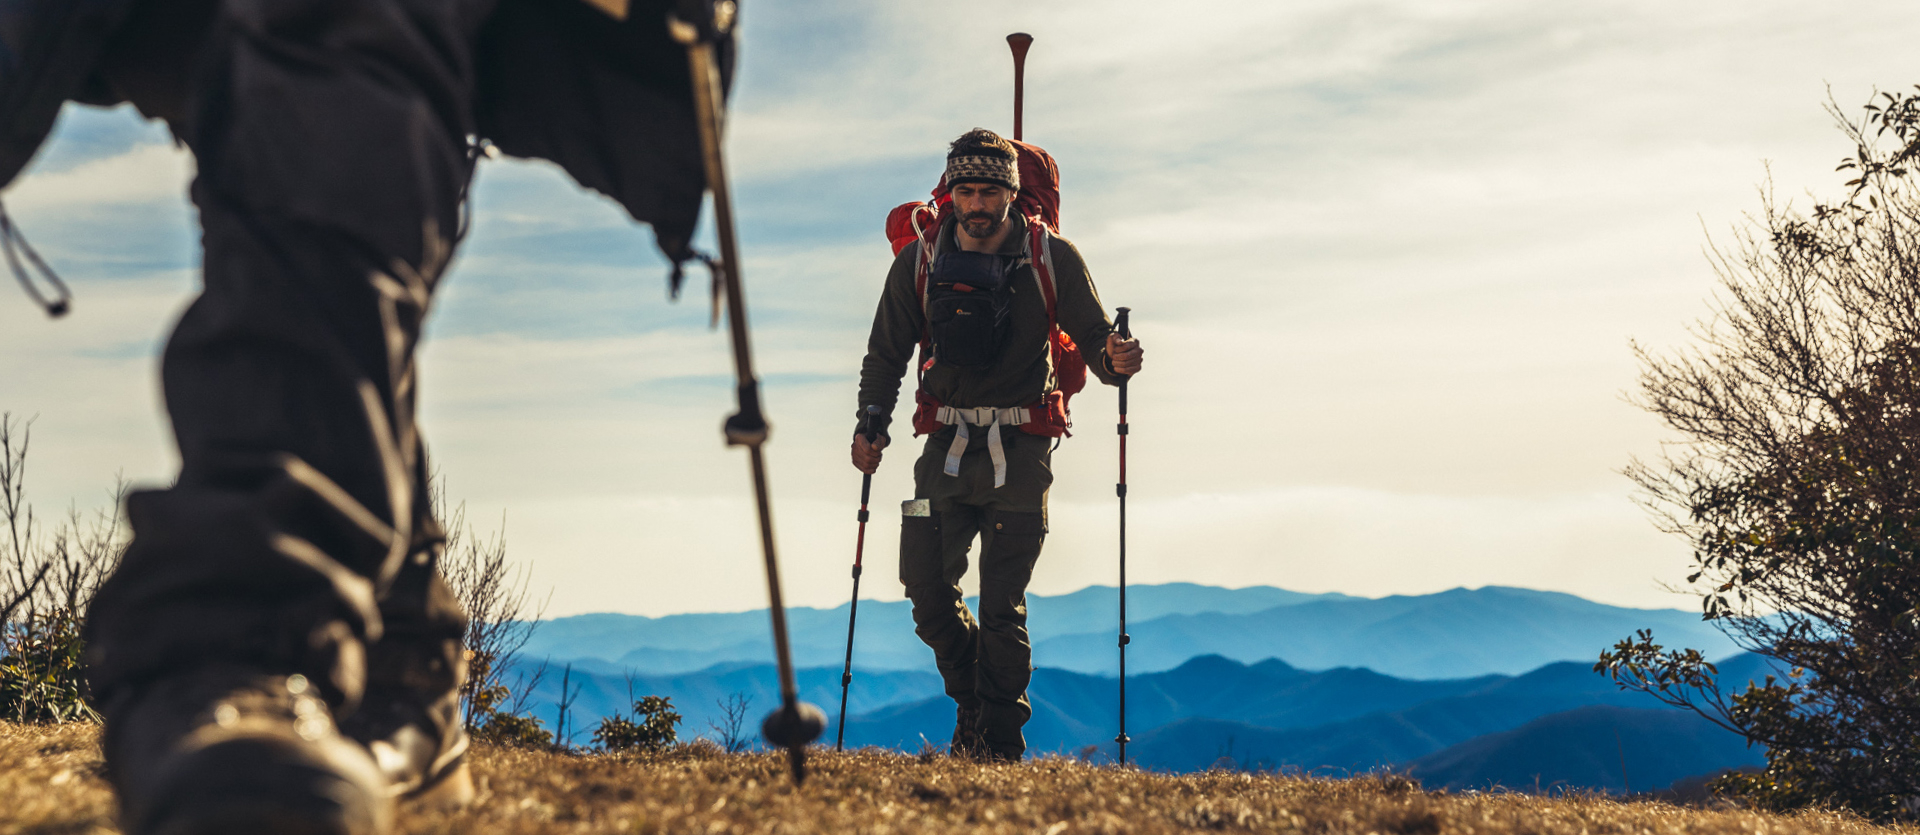 Man hiking up hill following partner with hiking backpack and trekking poles